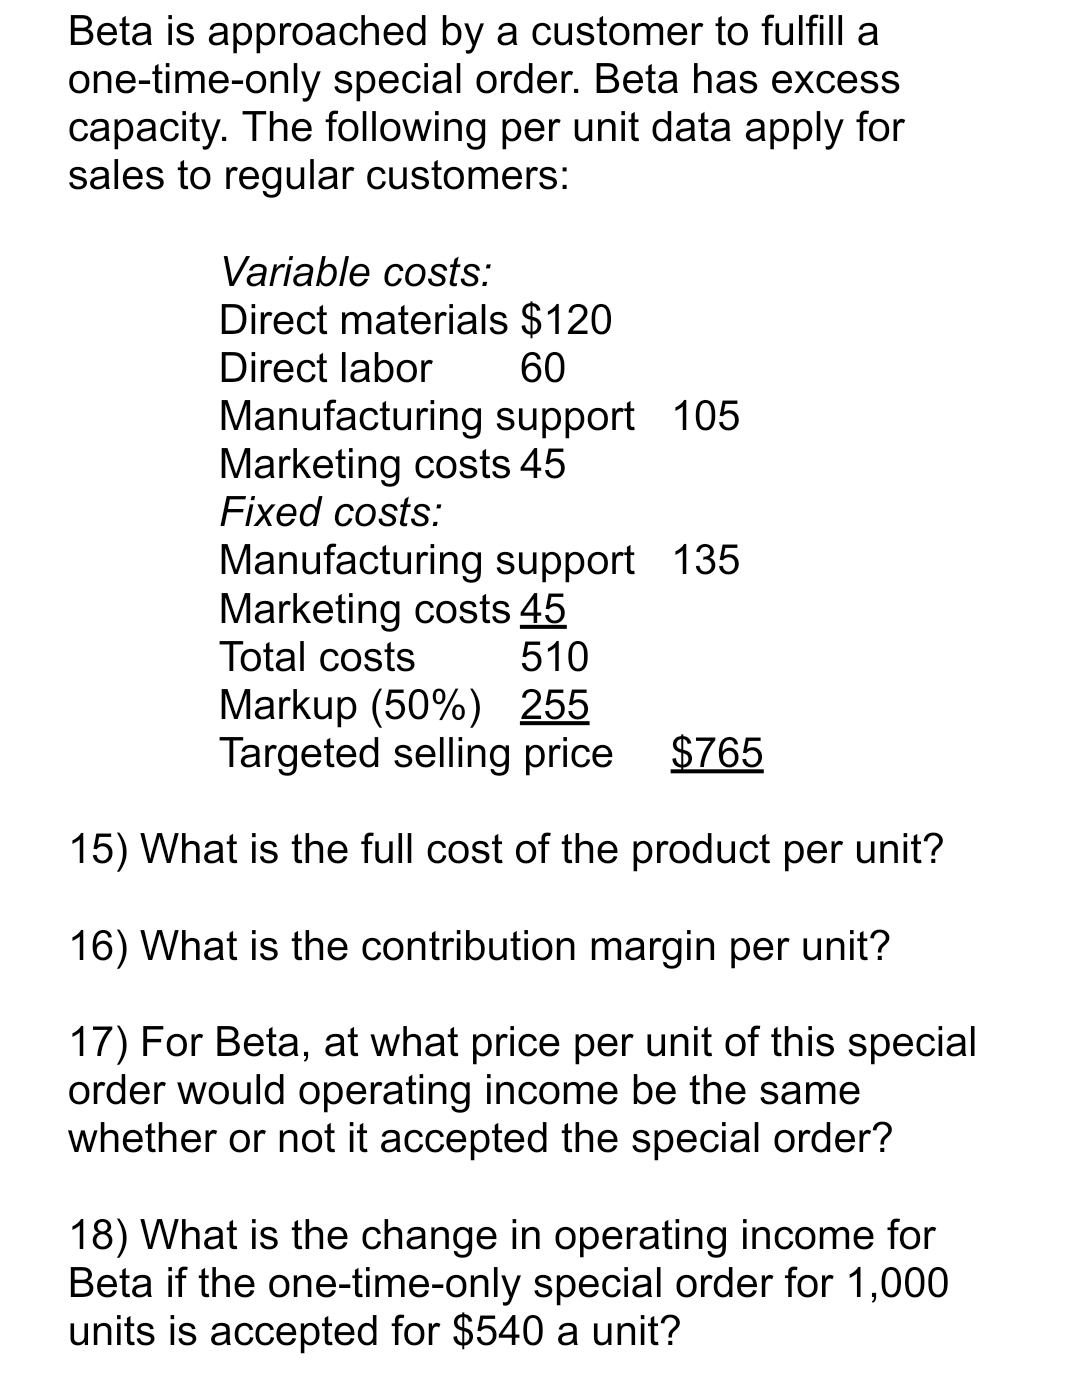 Beta is approached by a customer to fulfill a
one-time-only special order. Beta has excess
capacity. The following per unit data apply for
sales to regular customers:
Variable costs:
Direct materials $120
Direct labor
60
Manufacturing support 105
Marketing costs 45
Fixed costs:
Manufacturing support 135
Marketing costs 45
Total costs
510
Markup (50%) 255
Targeted selling price
$765
15) What is the full cost of the product per unit?
16) What is the contribution margin per unit?
17) For Beta, at what price per unit of this special
order would operating income be the same
whether or not it accepted the special order?
18) What is the change in operating income for
Beta if the one-time-only special order for 1,000
units is accepted for $540 a unit?